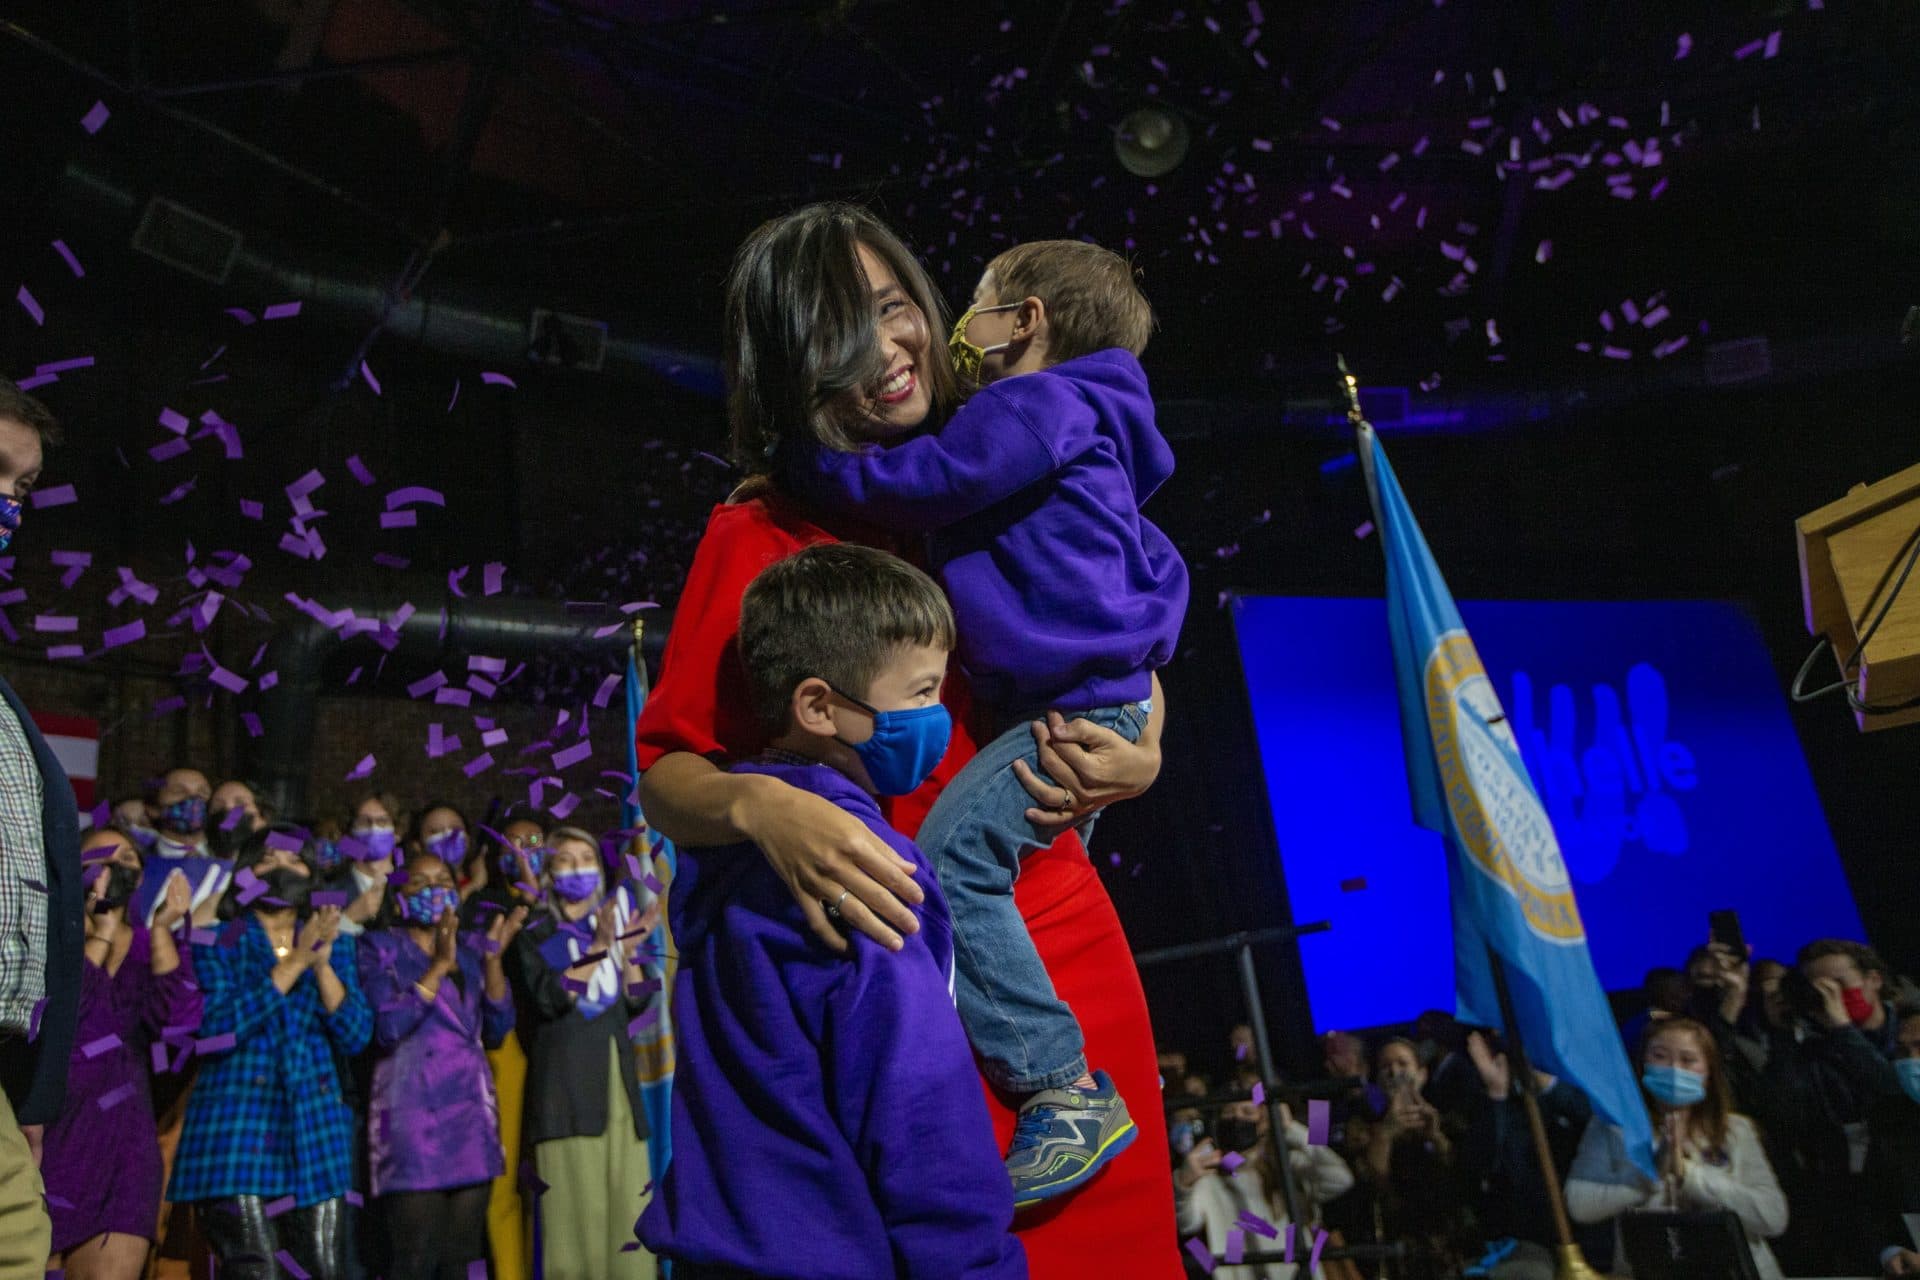 Newly elected mayor of Boston Michelle Wu embraces her sons Cass and Blaise on stage at the Cyclorama. (Jesse Costa/WBUR)